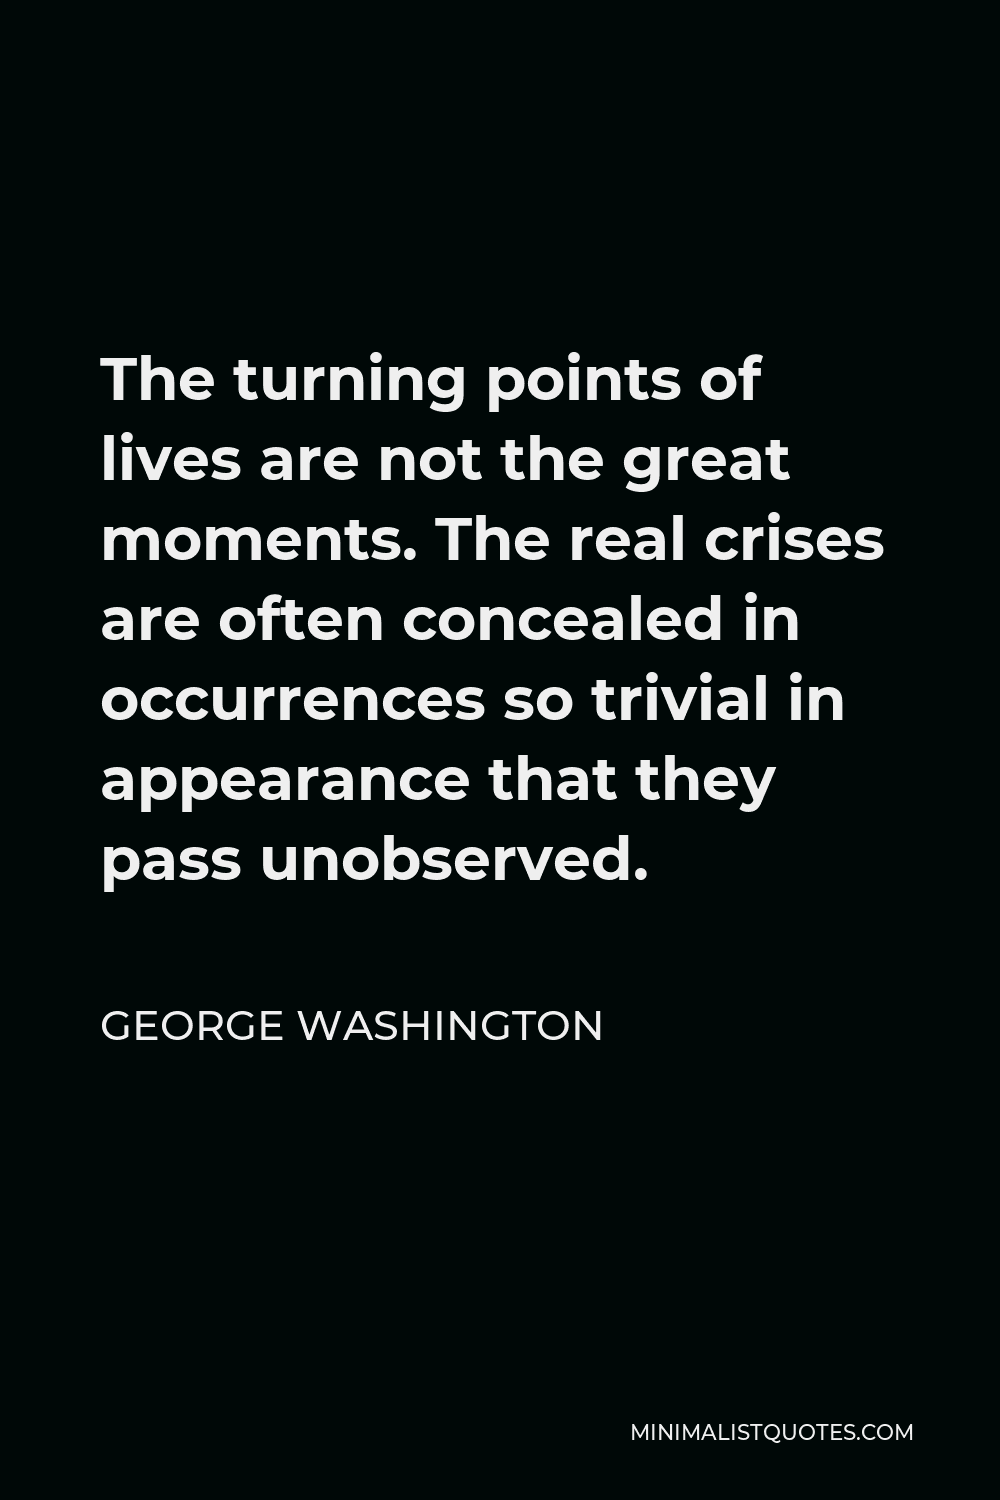 George Washington Quote - The turning points of lives are not the great moments. The real crises are often concealed in occurrences so trivial in appearance that they pass unobserved.